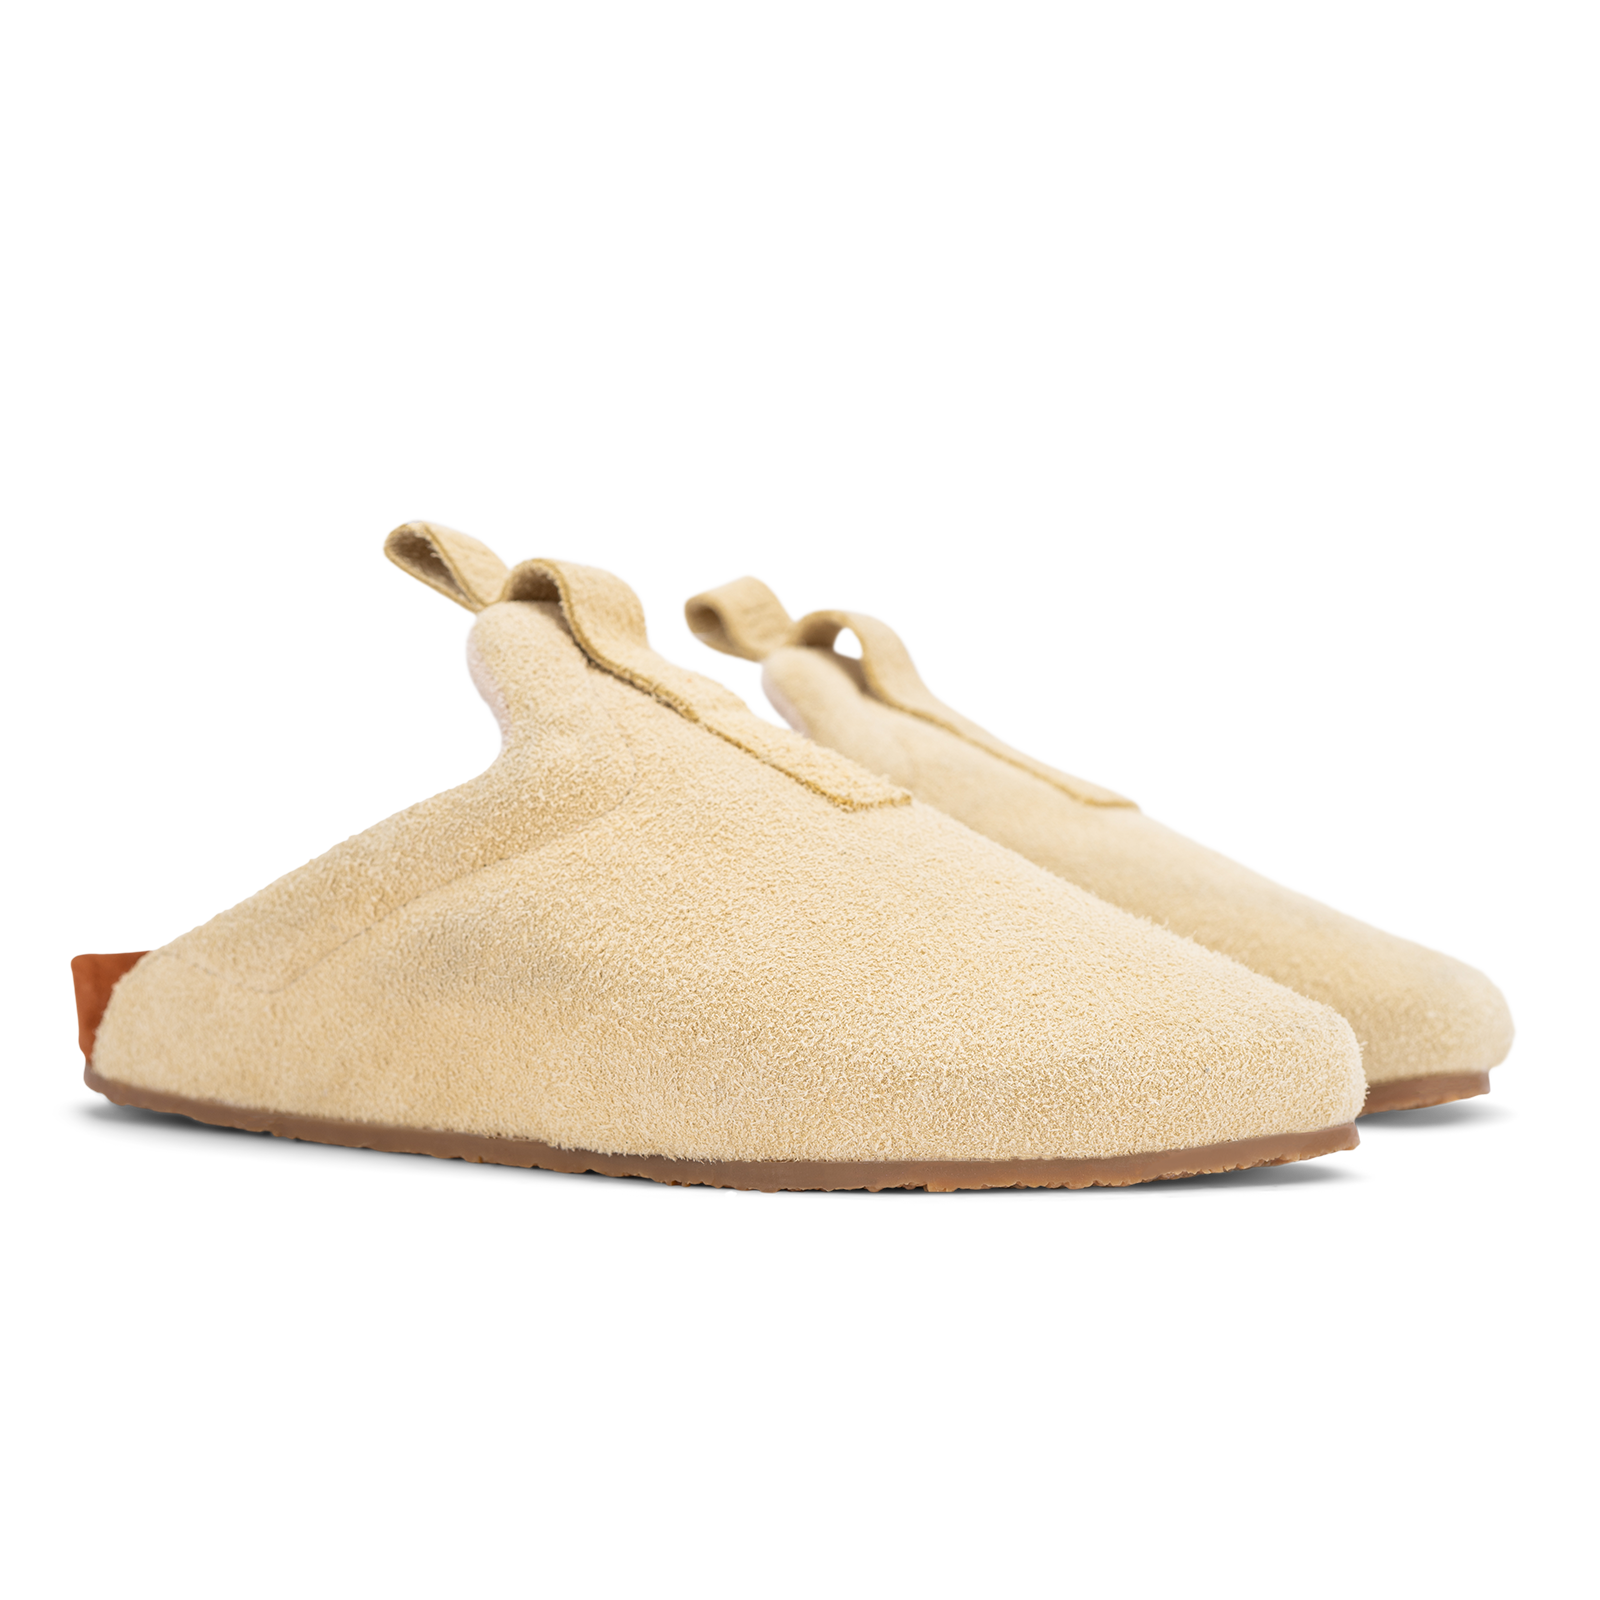 3/4 view beige suede upper, cork midsole wrapped in soft suede, Vibram sheet gum rubber outsole